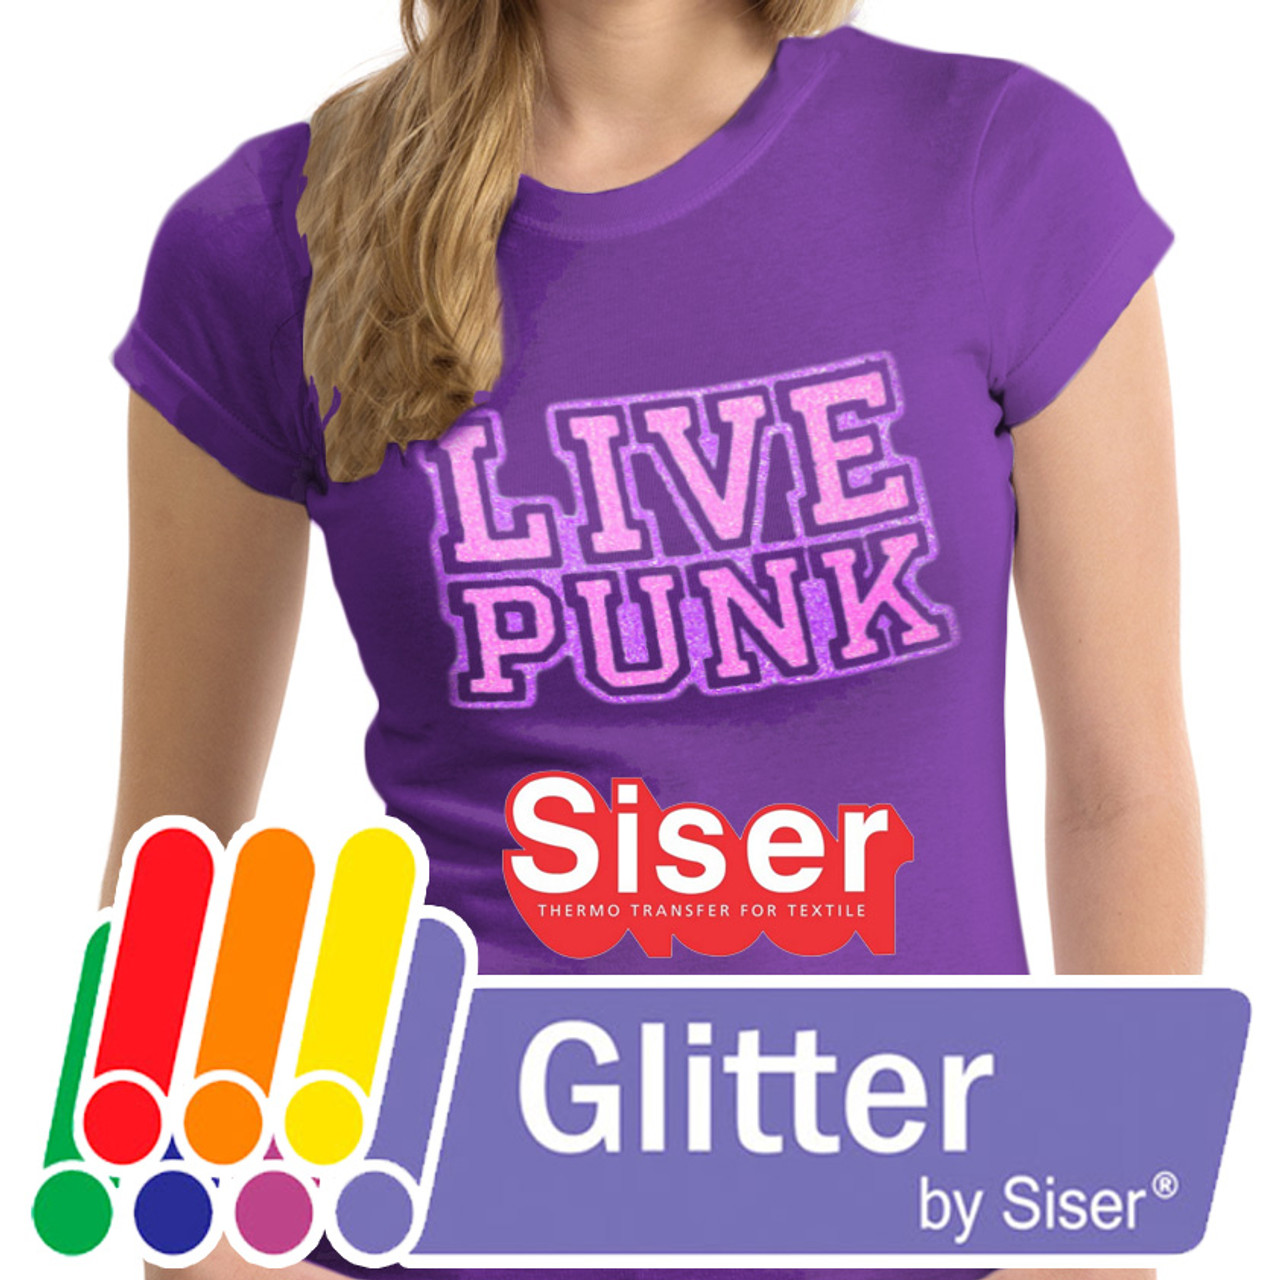 Glitter vinyl, Glitter T Shirt Vinyl, Glitter vinyl for T Shirts, Glitter  heat transfer vinyl for vinyl cutters, glitter vinyl, Glitter HTV Vinyl,  Glitter TShirt Vinyl, T Shirt Vinyl Glitter, Glitter for